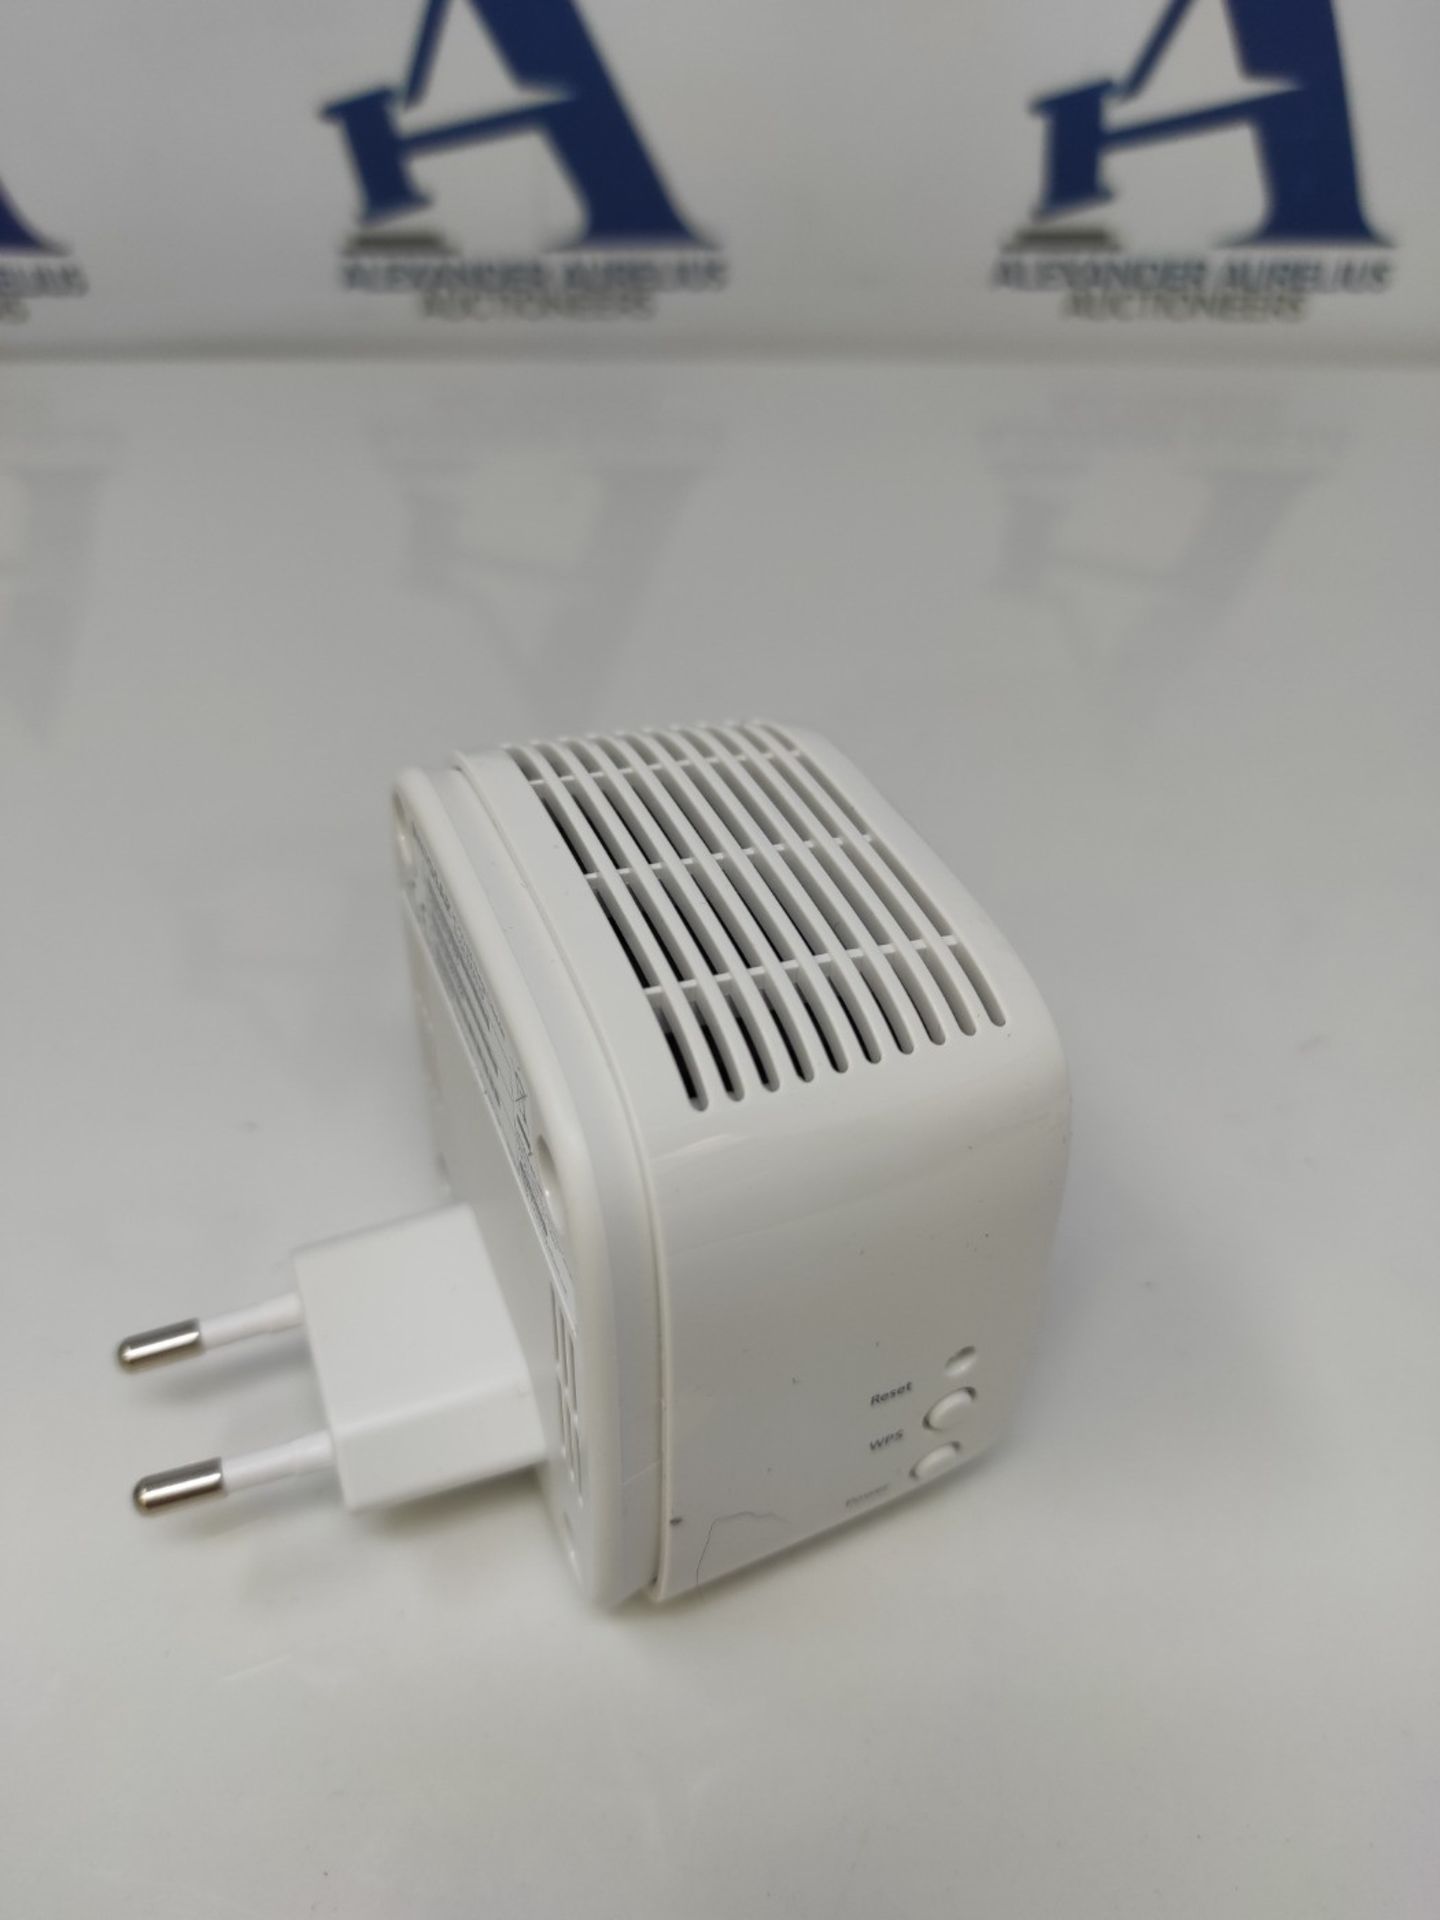 NETGEAR Powerful WiFi Repeater (EX3110) | WiFi Amplifier AC750 Mbps | WiFi Extender co - Image 3 of 3